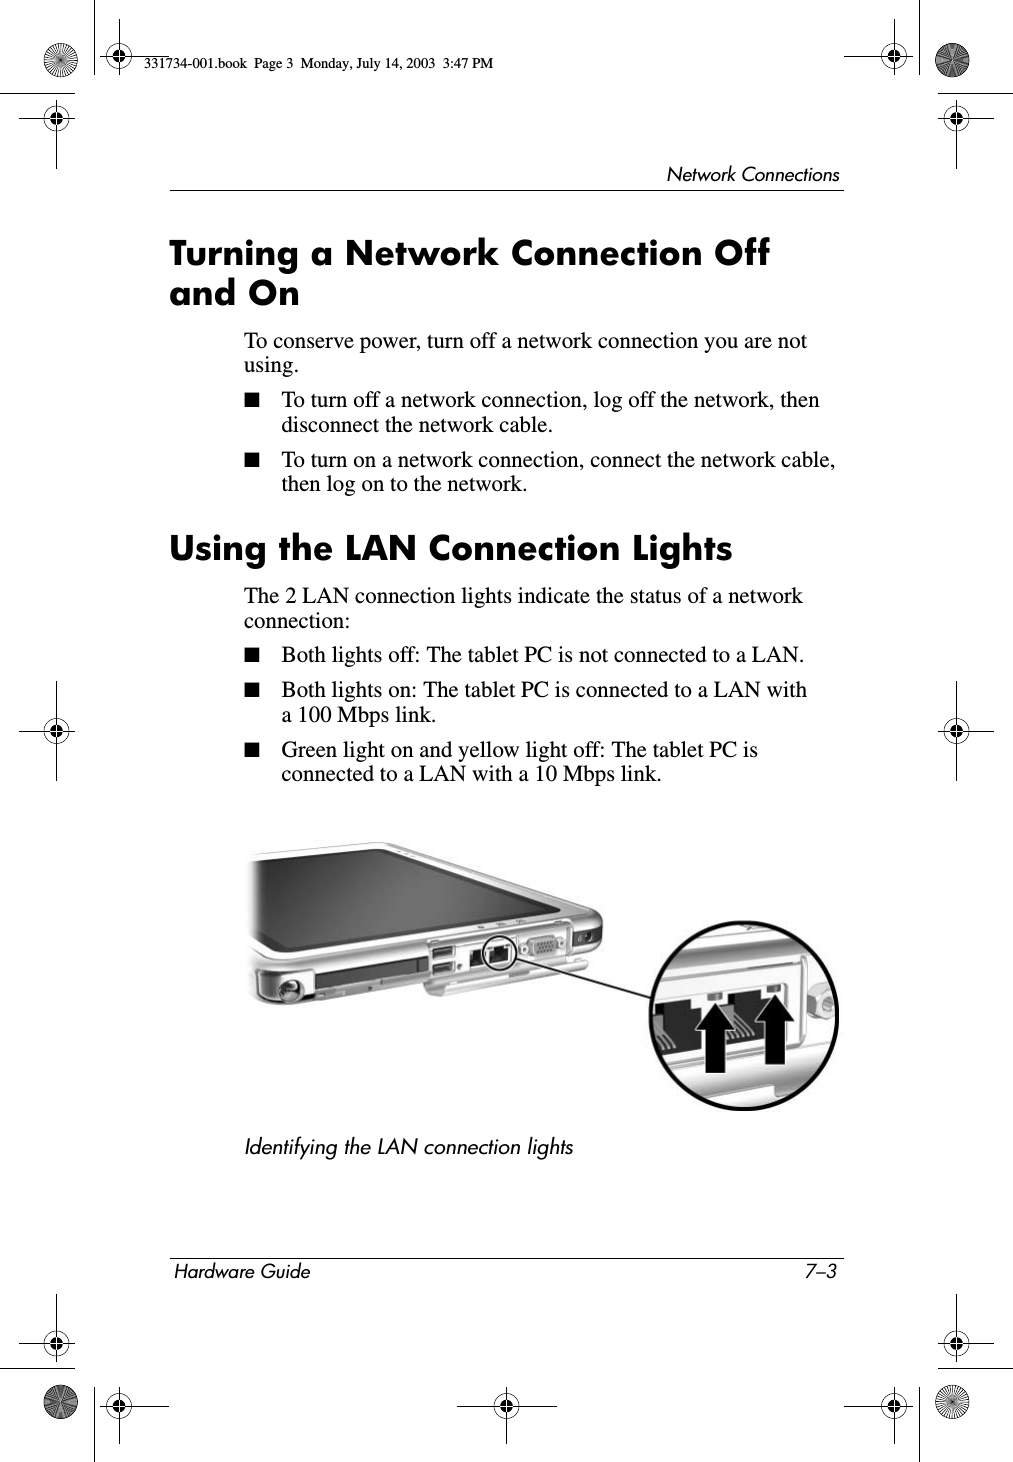 Network ConnectionsHardware Guide 7–3Turning a Network Connection Off and OnTo conserve power, turn off a network connection you are not using.■To turn off a network connection, log off the network, then disconnect the network cable.■To turn on a network connection, connect the network cable, then log on to the network.Using the LAN Connection LightsThe 2 LAN connection lights indicate the status of a network connection:■Both lights off: The tablet PC is not connected to a LAN.■Both lights on: The tablet PC is connected to a LAN with a 100 Mbps link.■Green light on and yellow light off: The tablet PC is connected to a LAN with a 10 Mbps link.Identifying the LAN connection lights331734-001.book  Page 3  Monday, July 14, 2003  3:47 PM